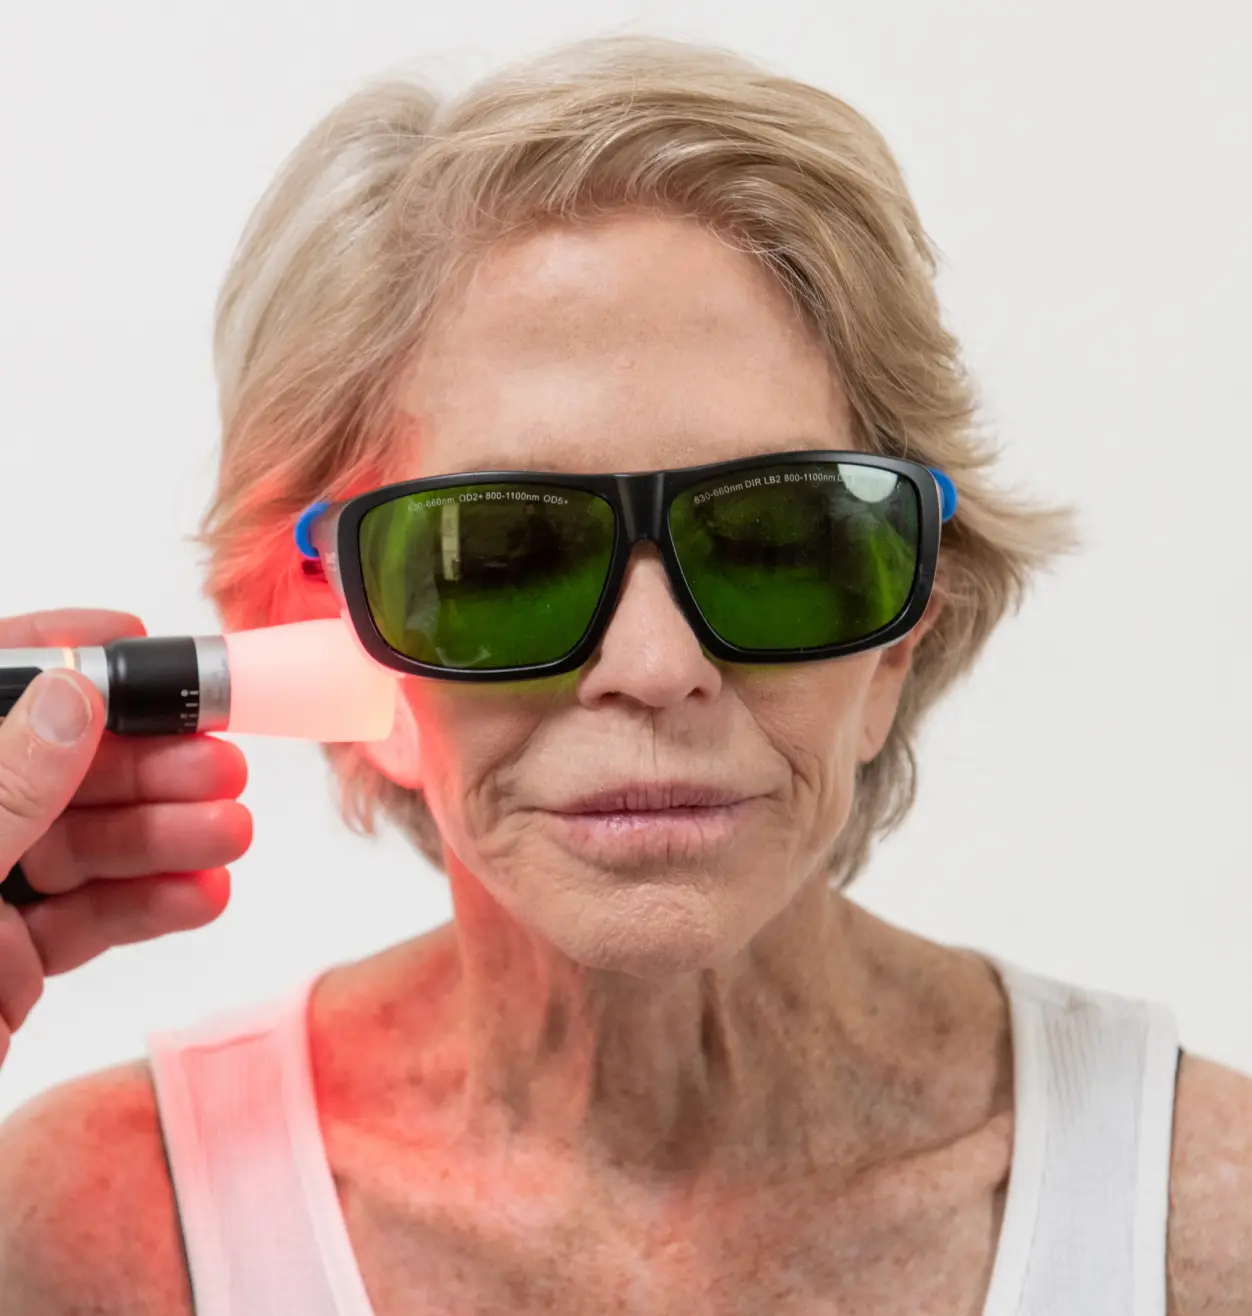 Dental; laser therapy treatment to elder woman's jaw; patient is wearing protective goggles